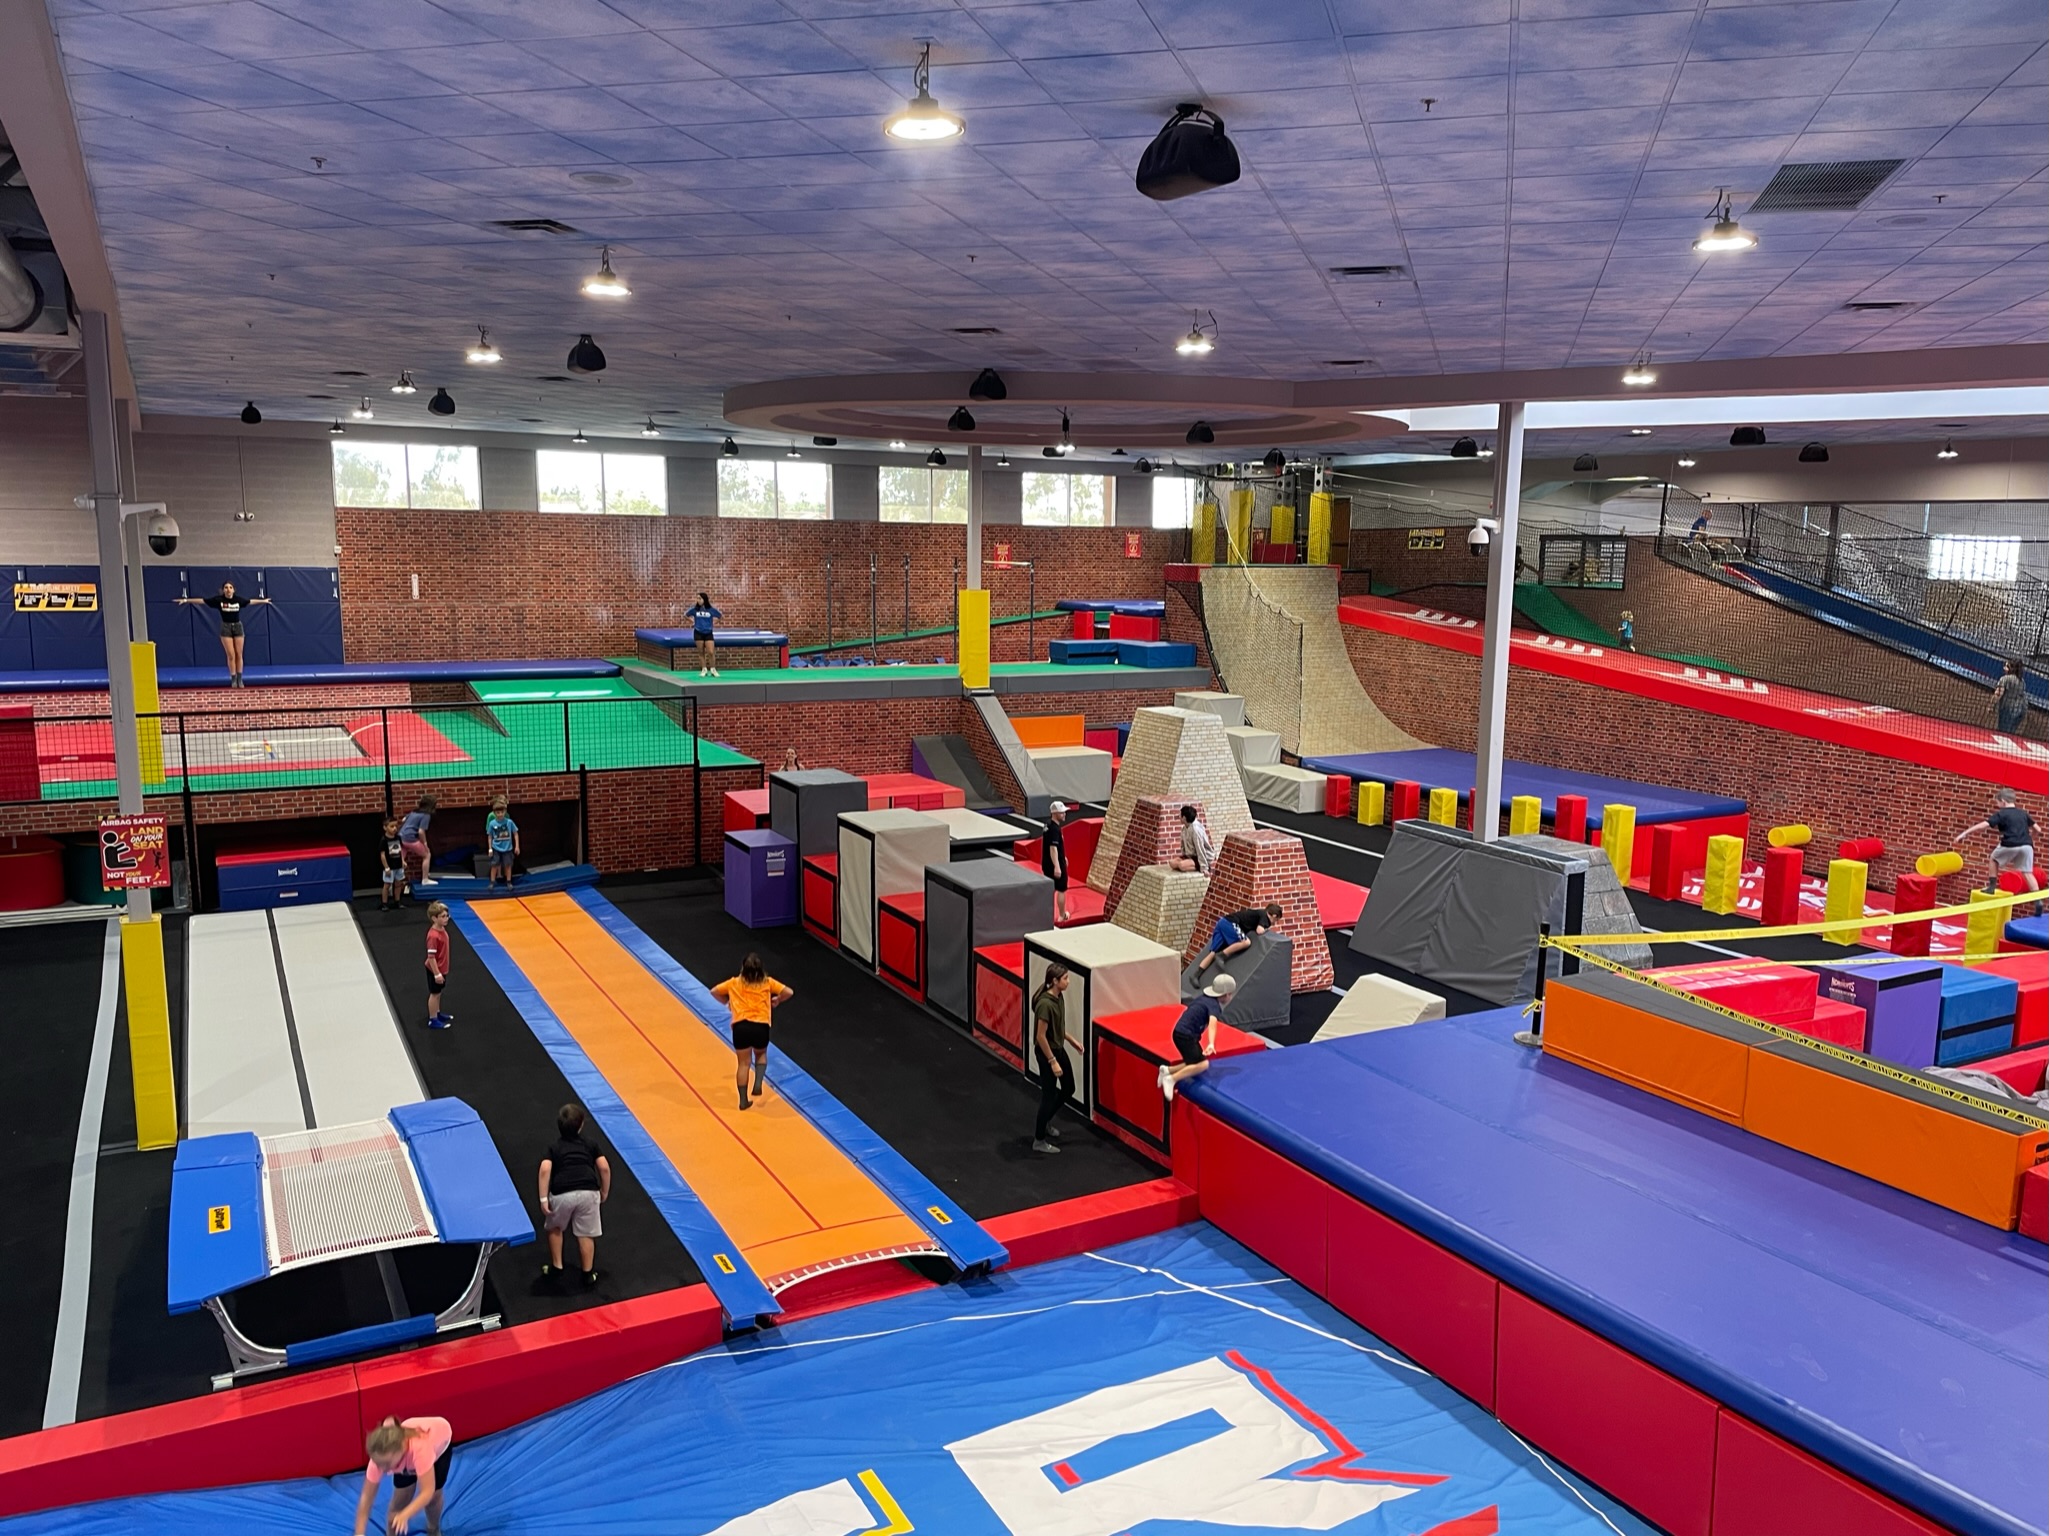 35,000 square feet of high-flying fun for kids of all ages and abilities